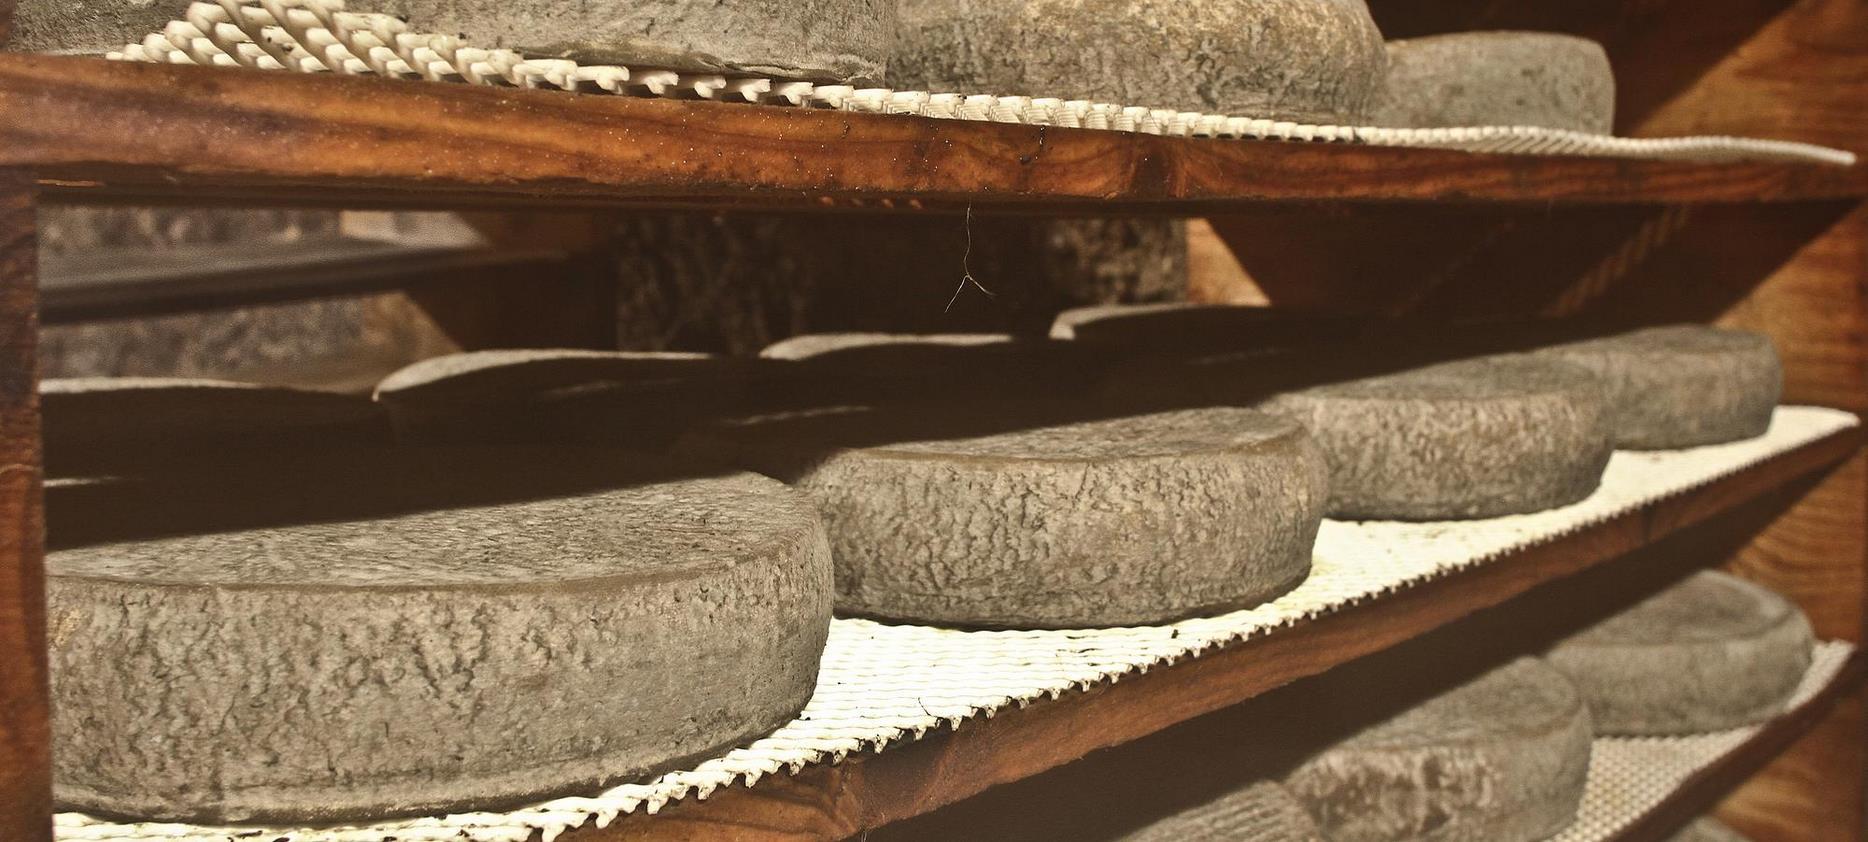 Super Besse - Aging of Saint Nectaire in the Cellar - Puy de Dôme AOC cheese